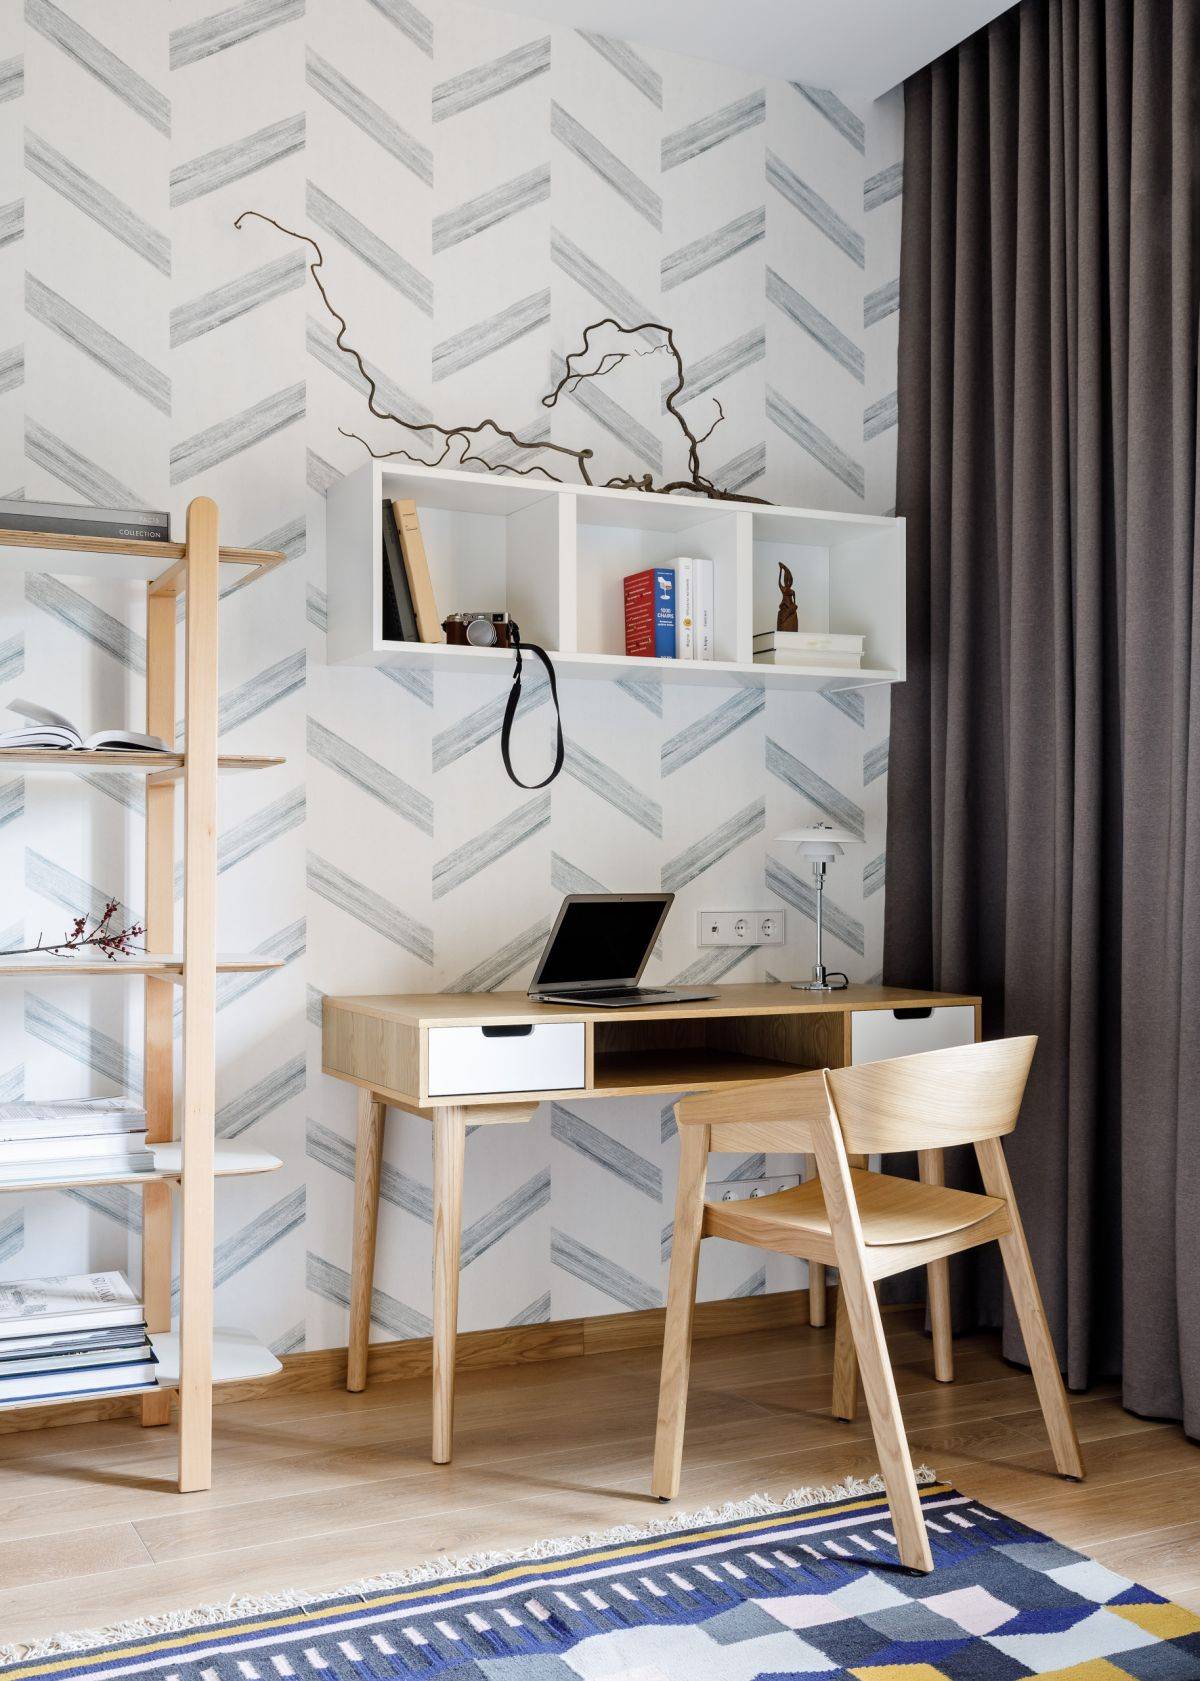 Custom storage solutions can turn even the smallest of rooms into a fabulous home office